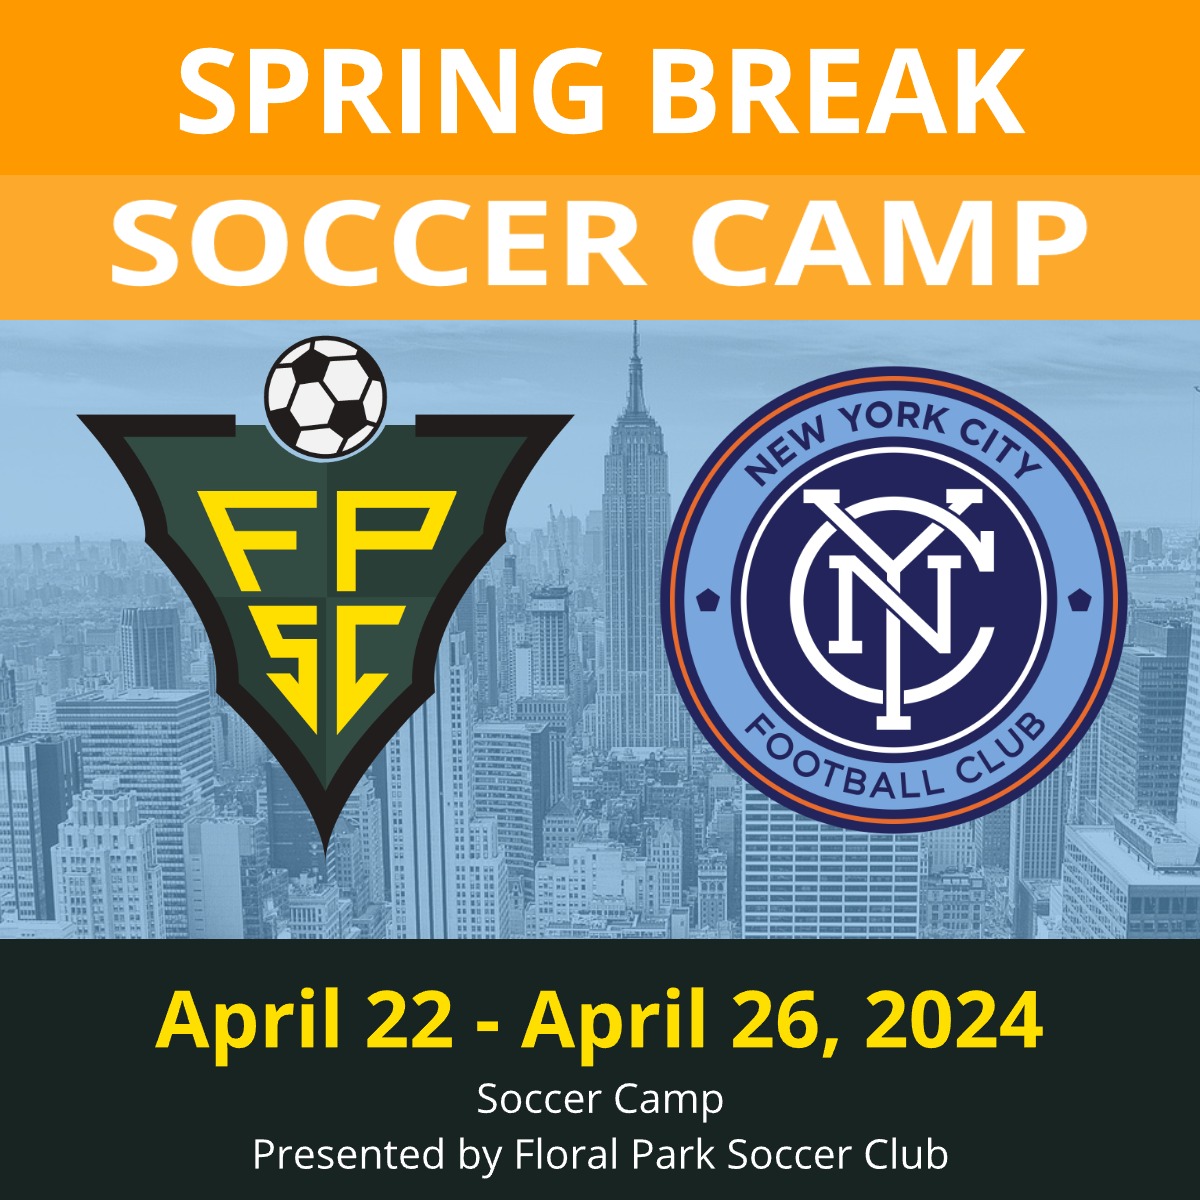 Click image to register for the Spring Soccer Camp